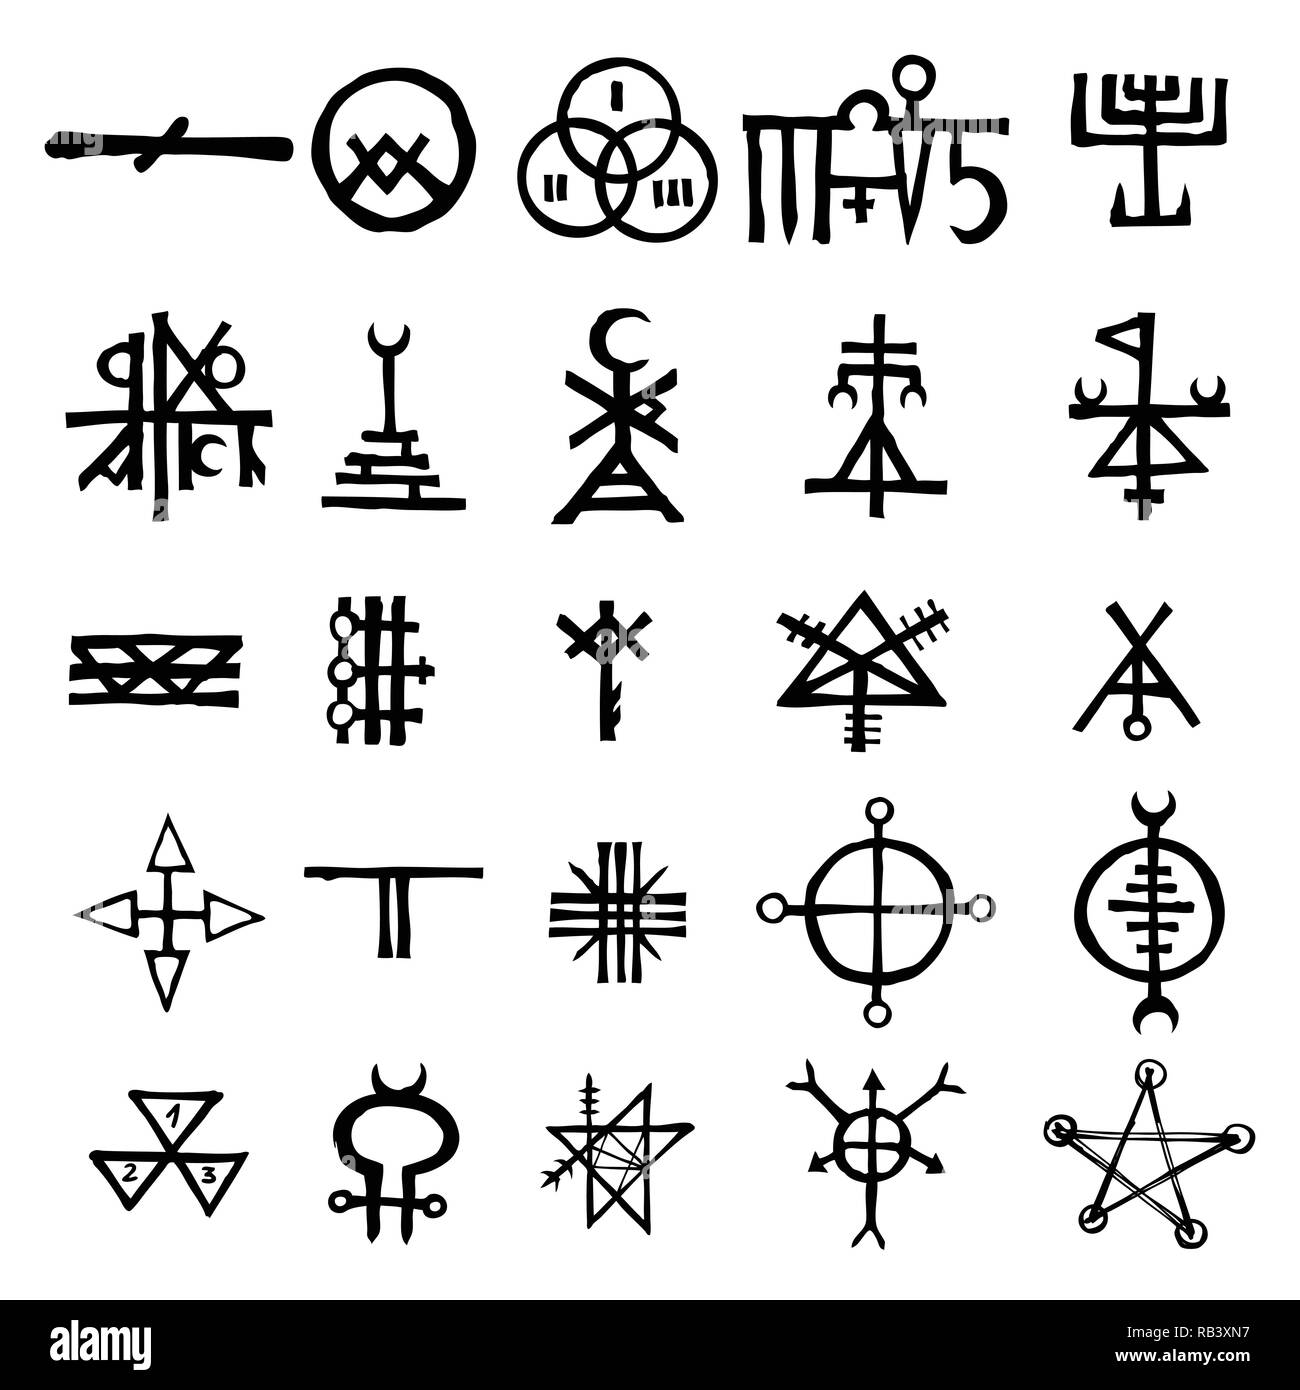 Magic Symbols And Their Meanings